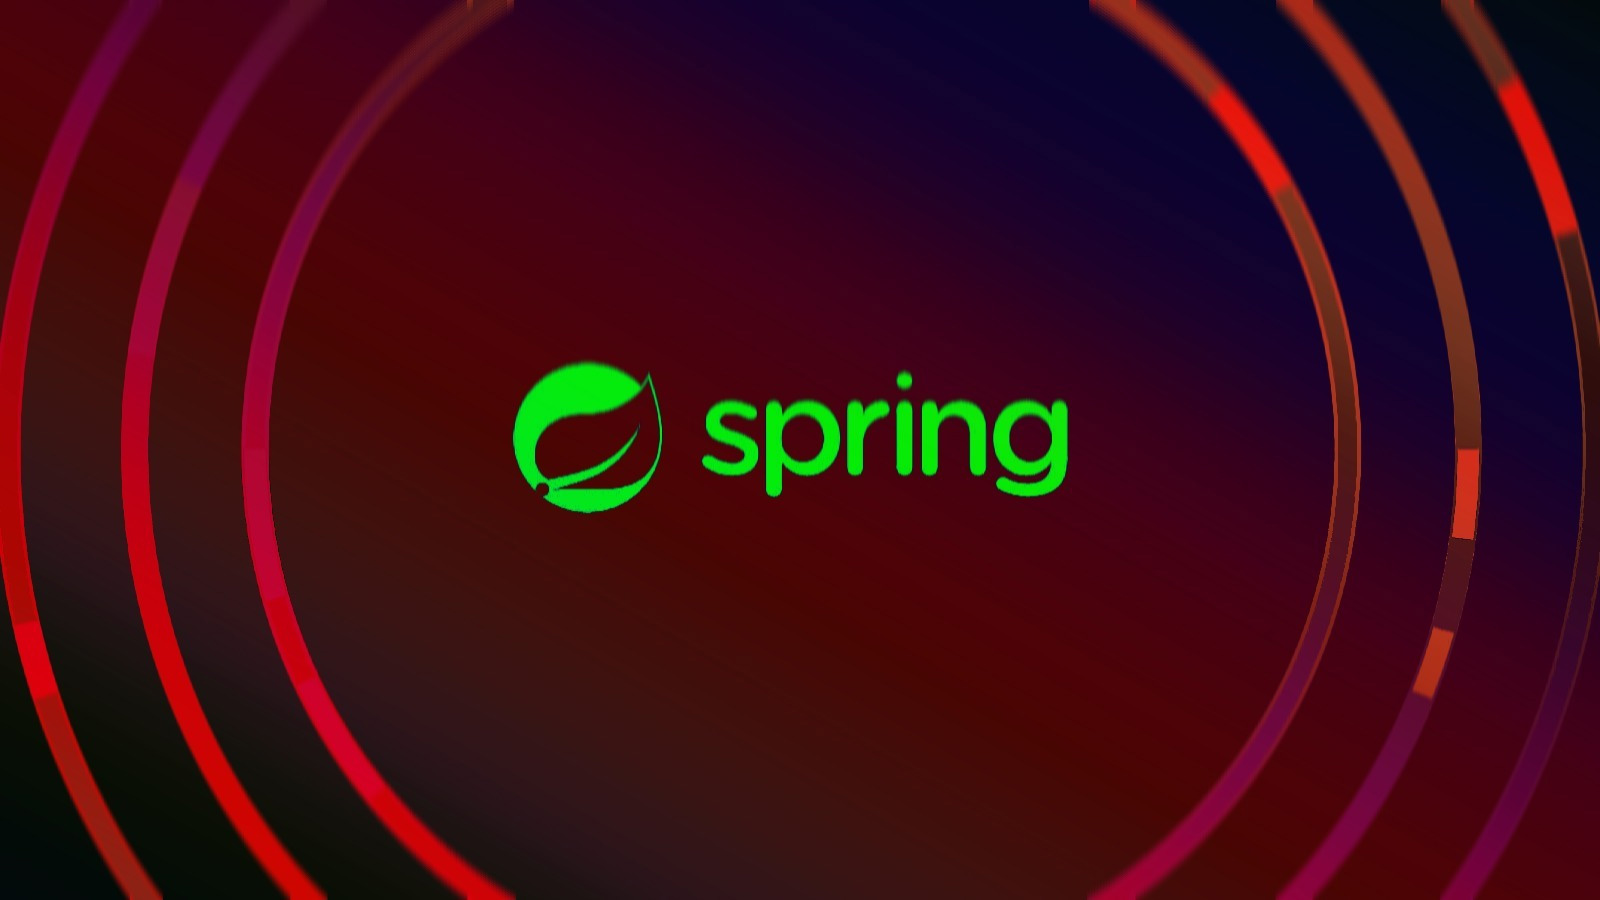 SpringShell attacks target about one in six vulnerable orgs